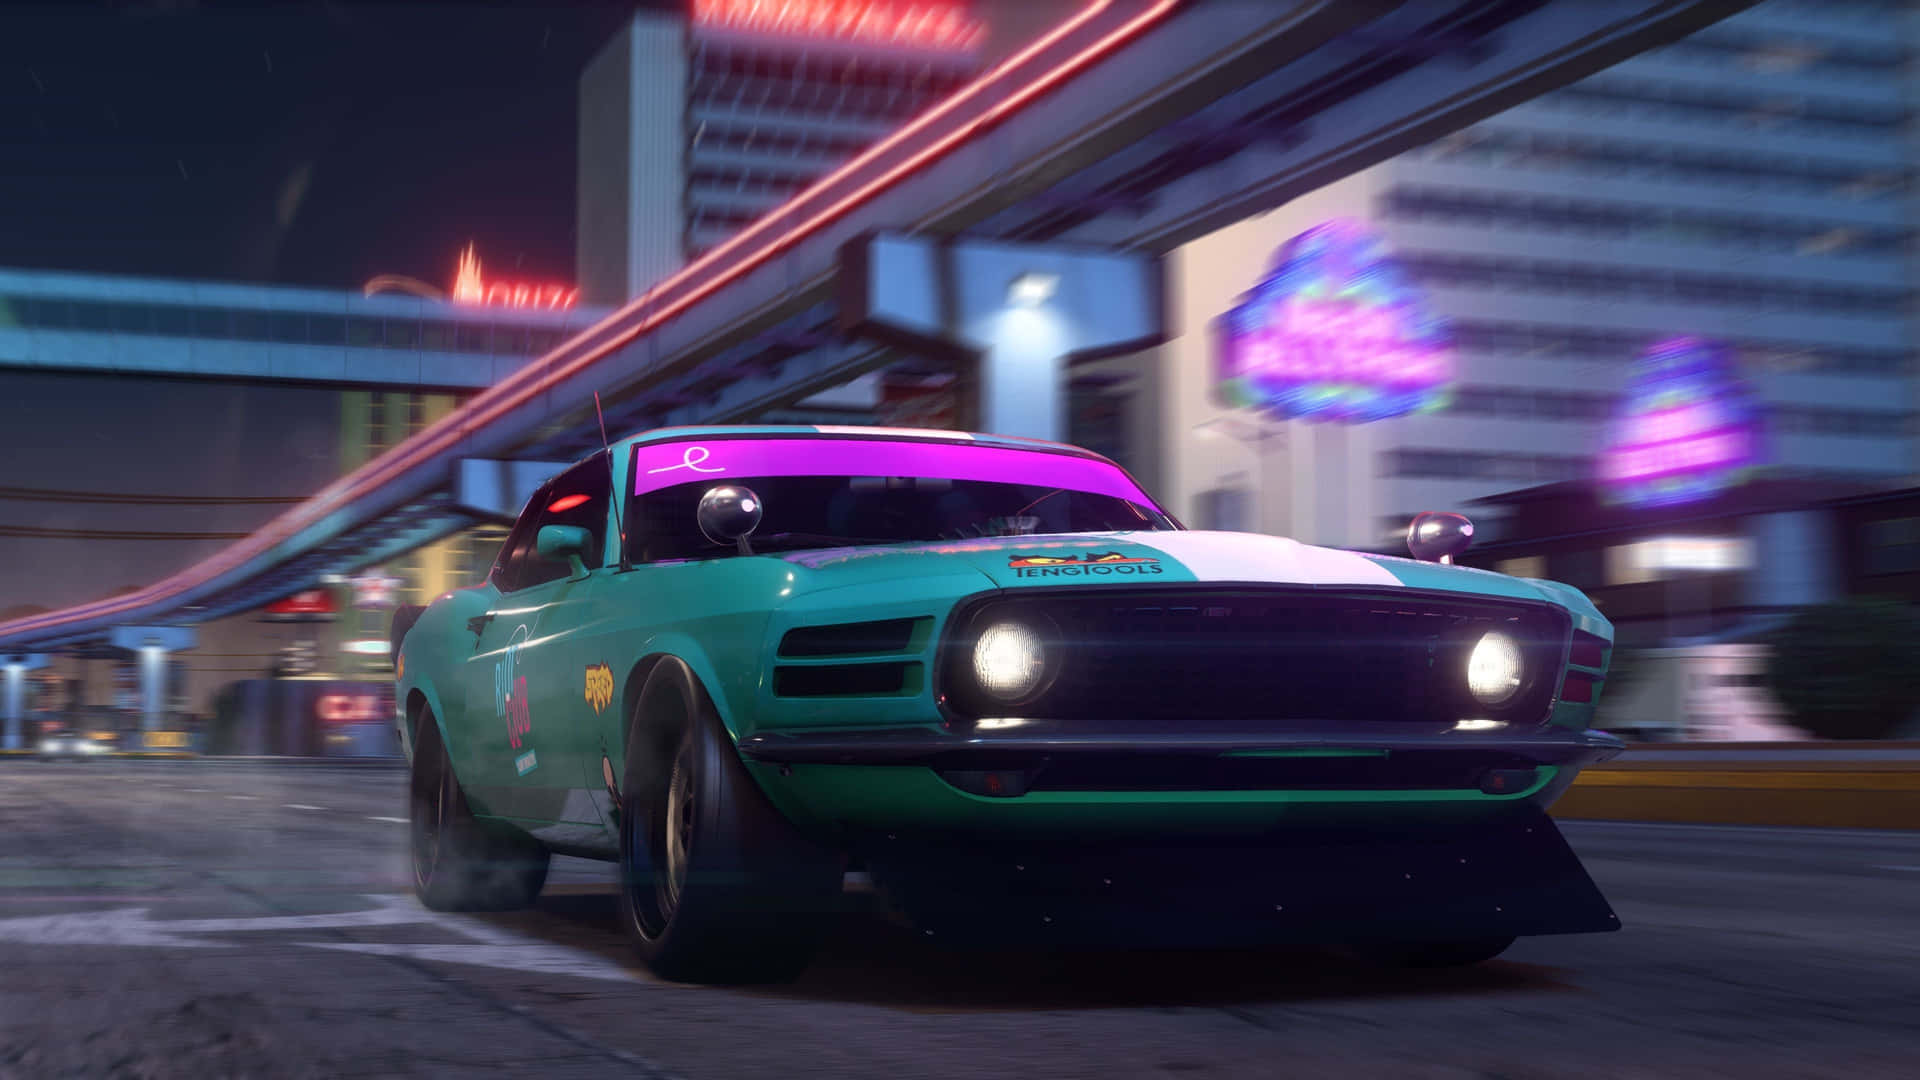 A Green Car Driving Down The Street In A Video Game